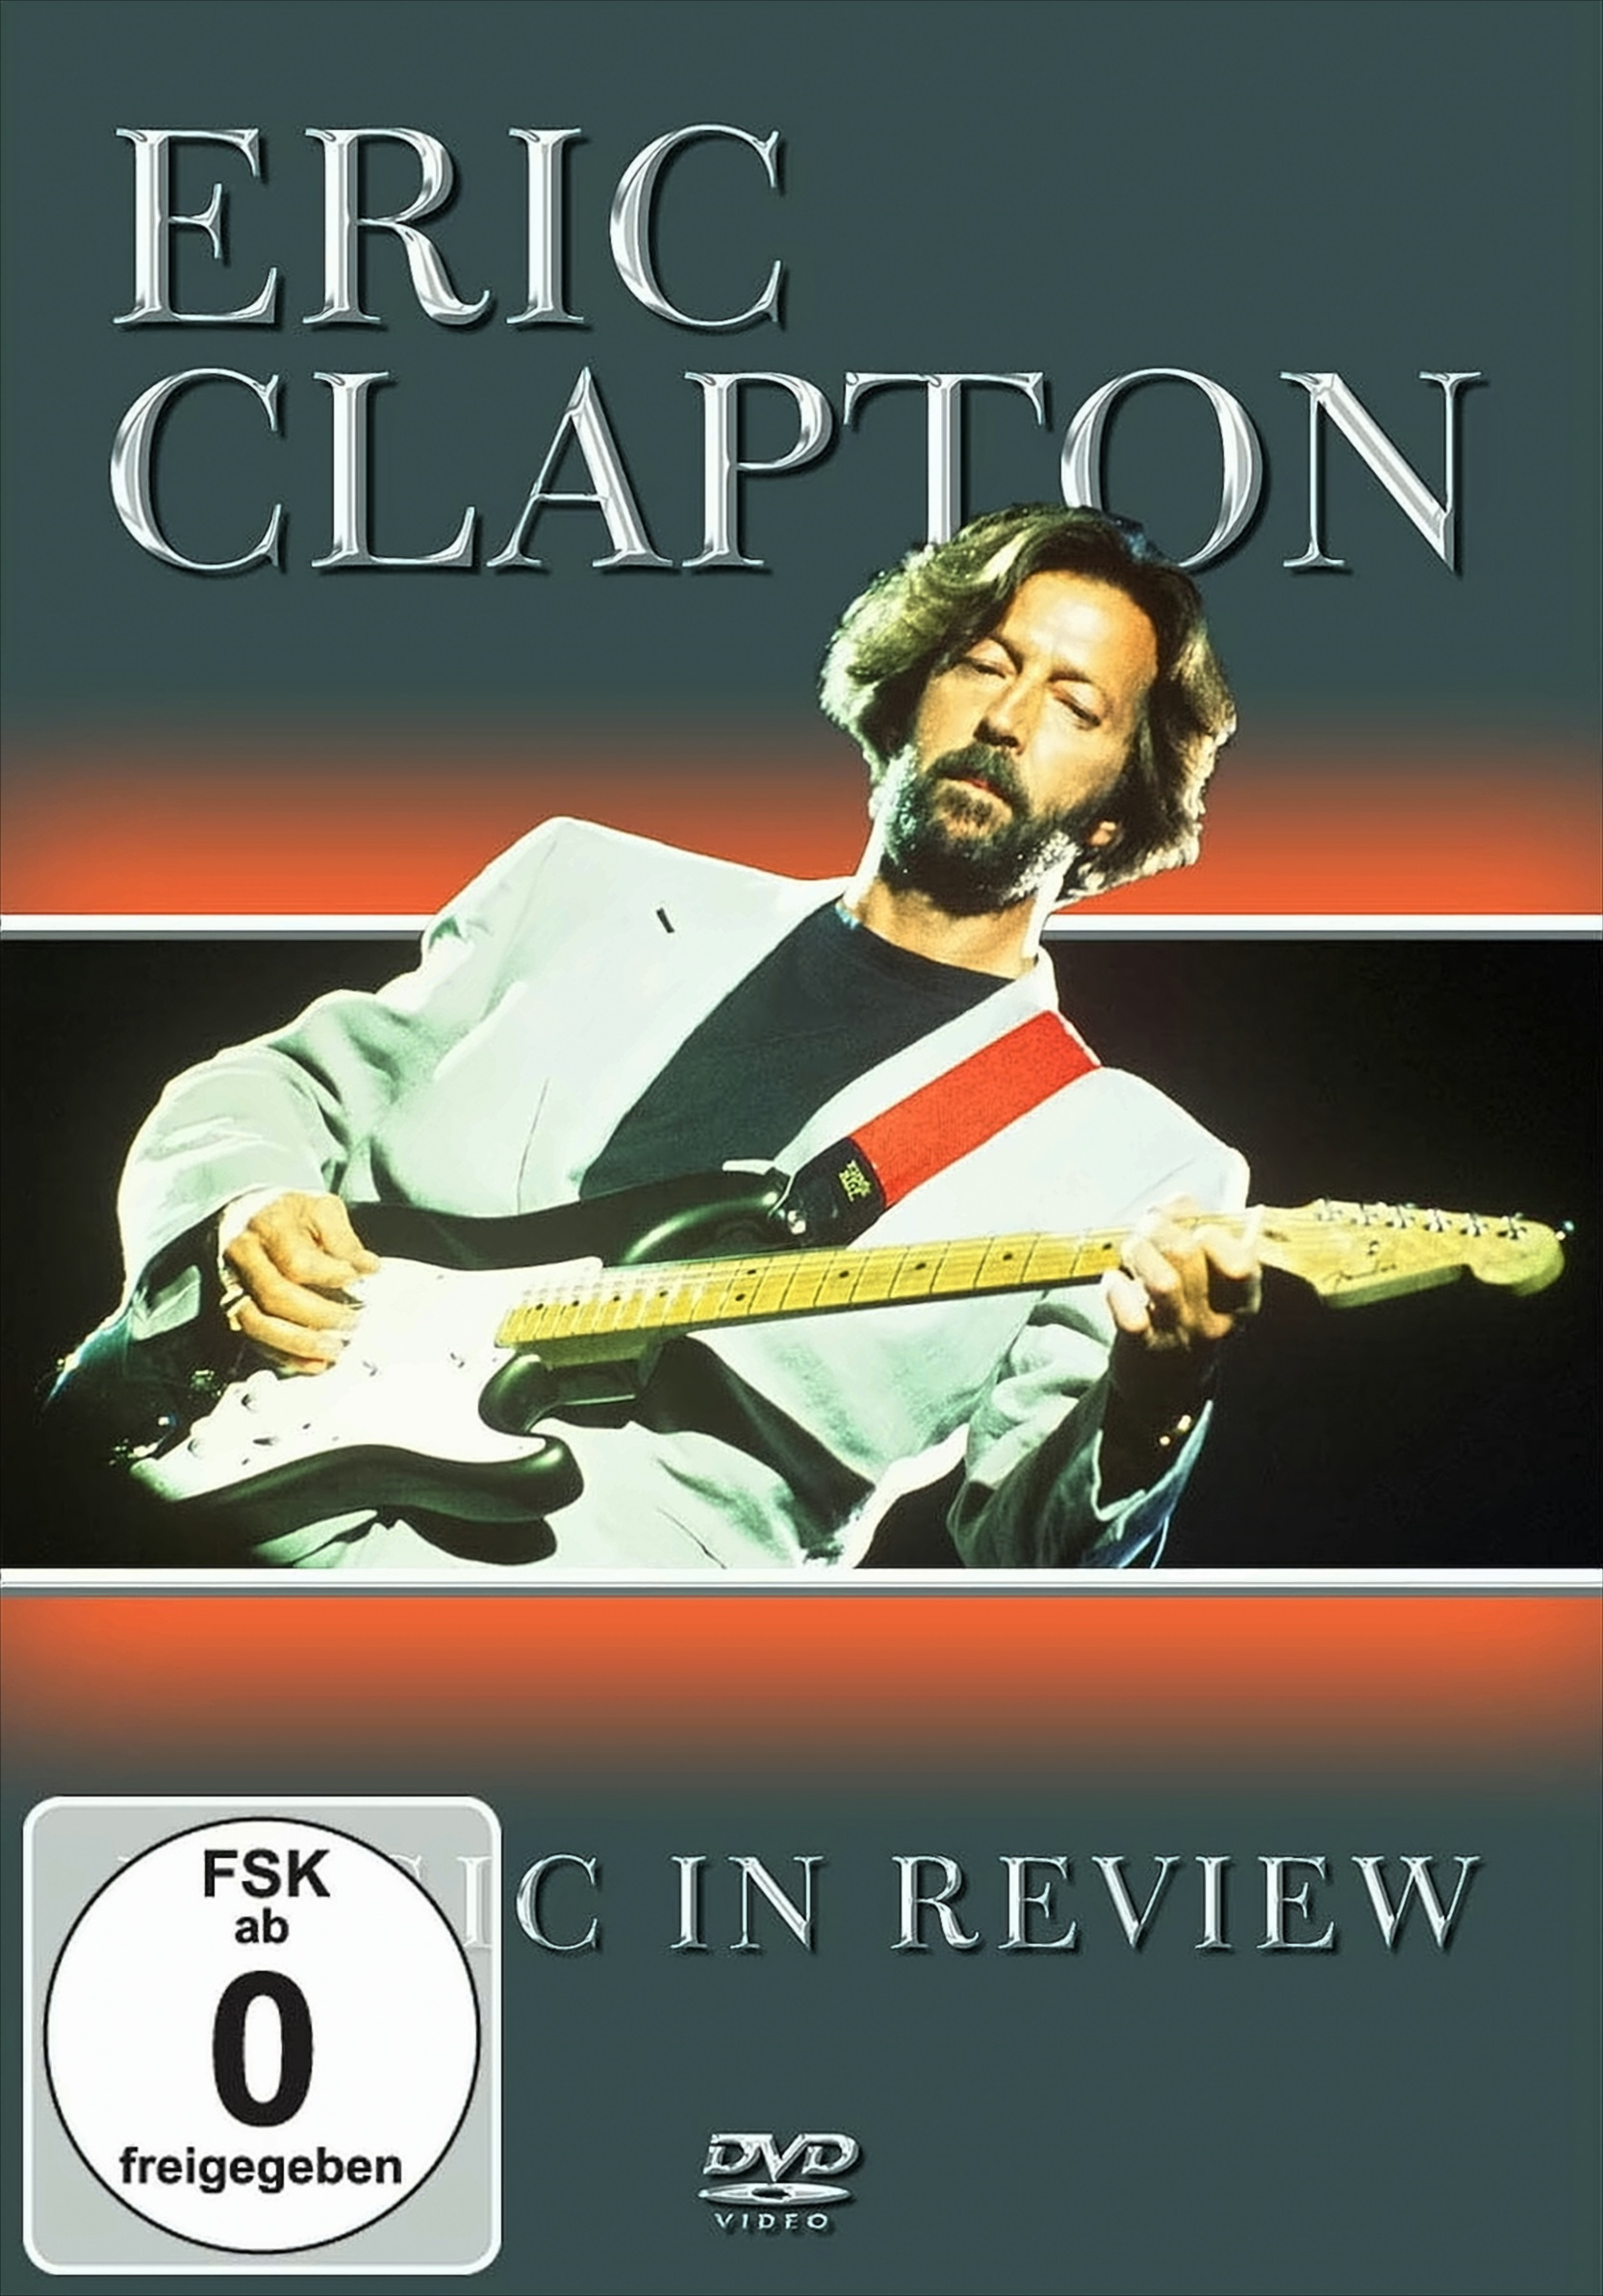 Eric Clapton - Music in DVD Review